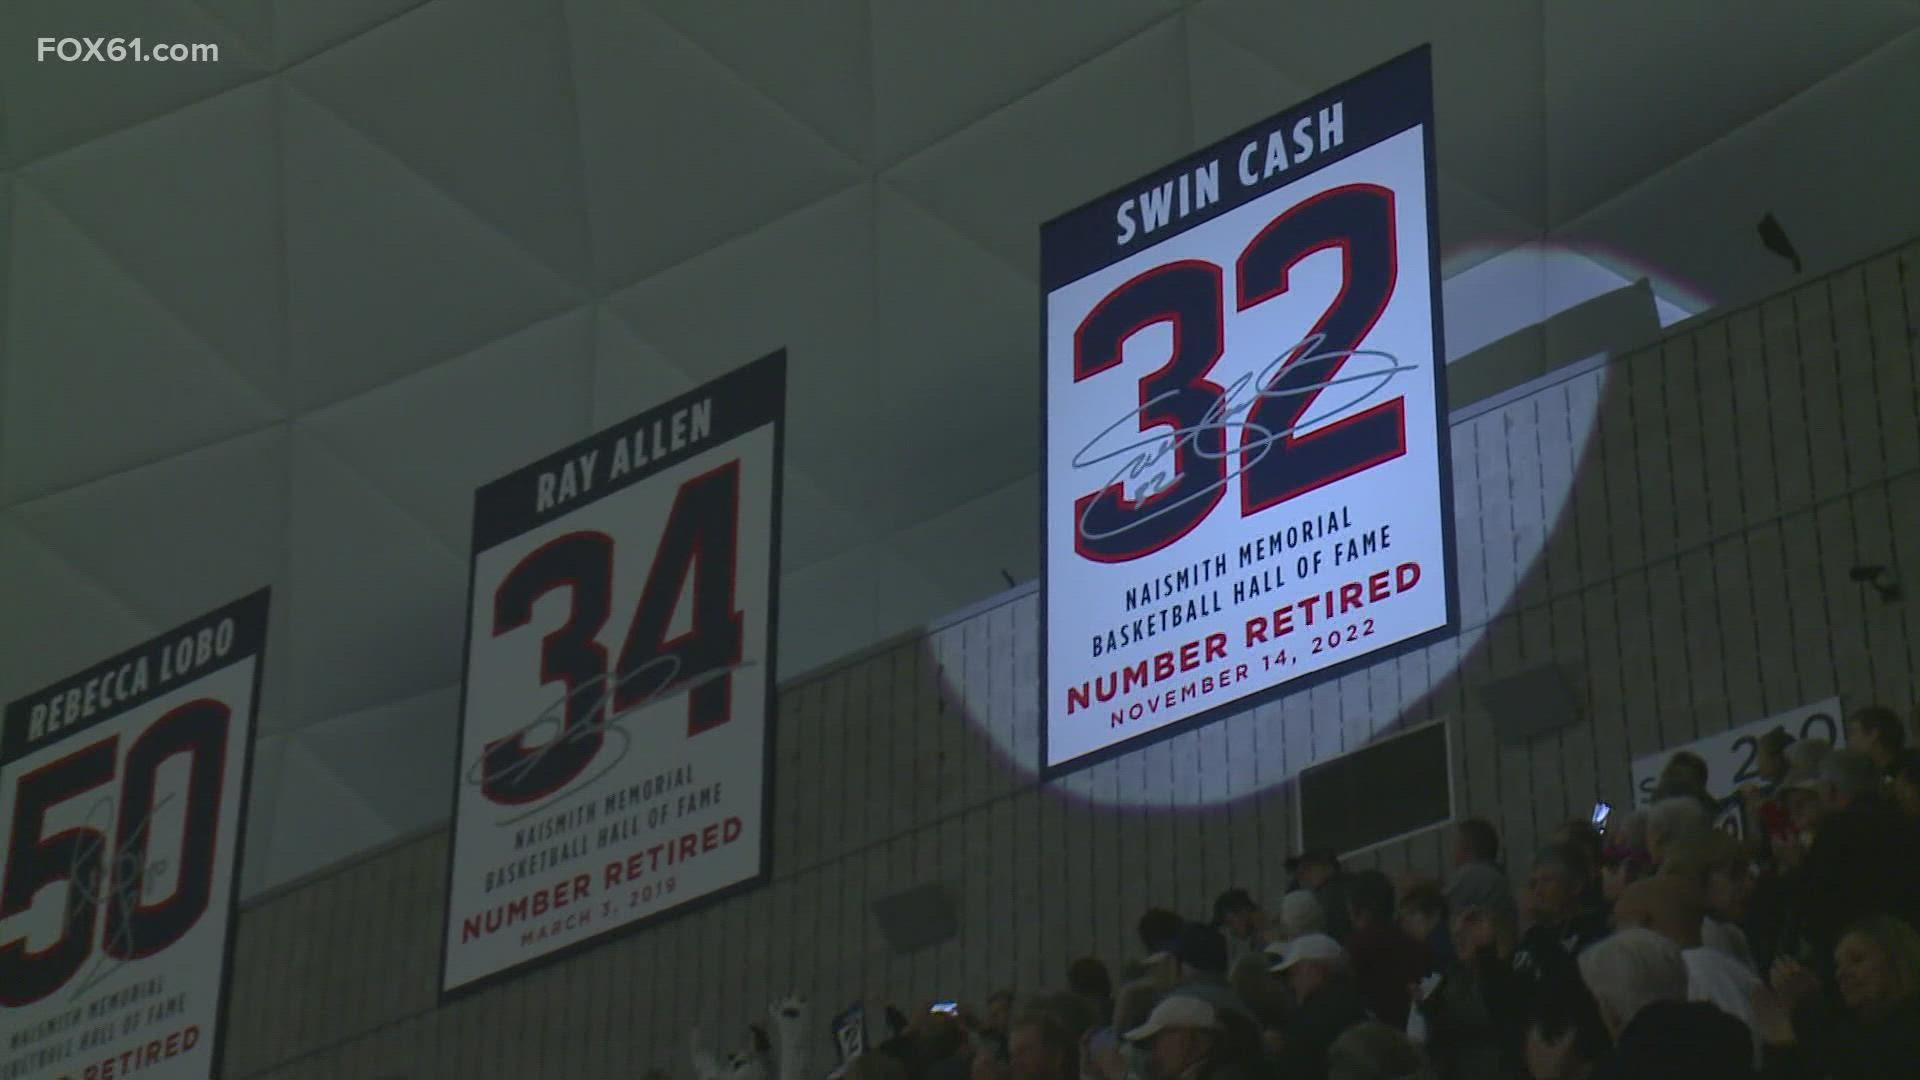 No. 32 now holds a special place at Gampel Pavilion, reserved only for the best of the best. UConn honored Swin Cash Monday night by retiring her number.